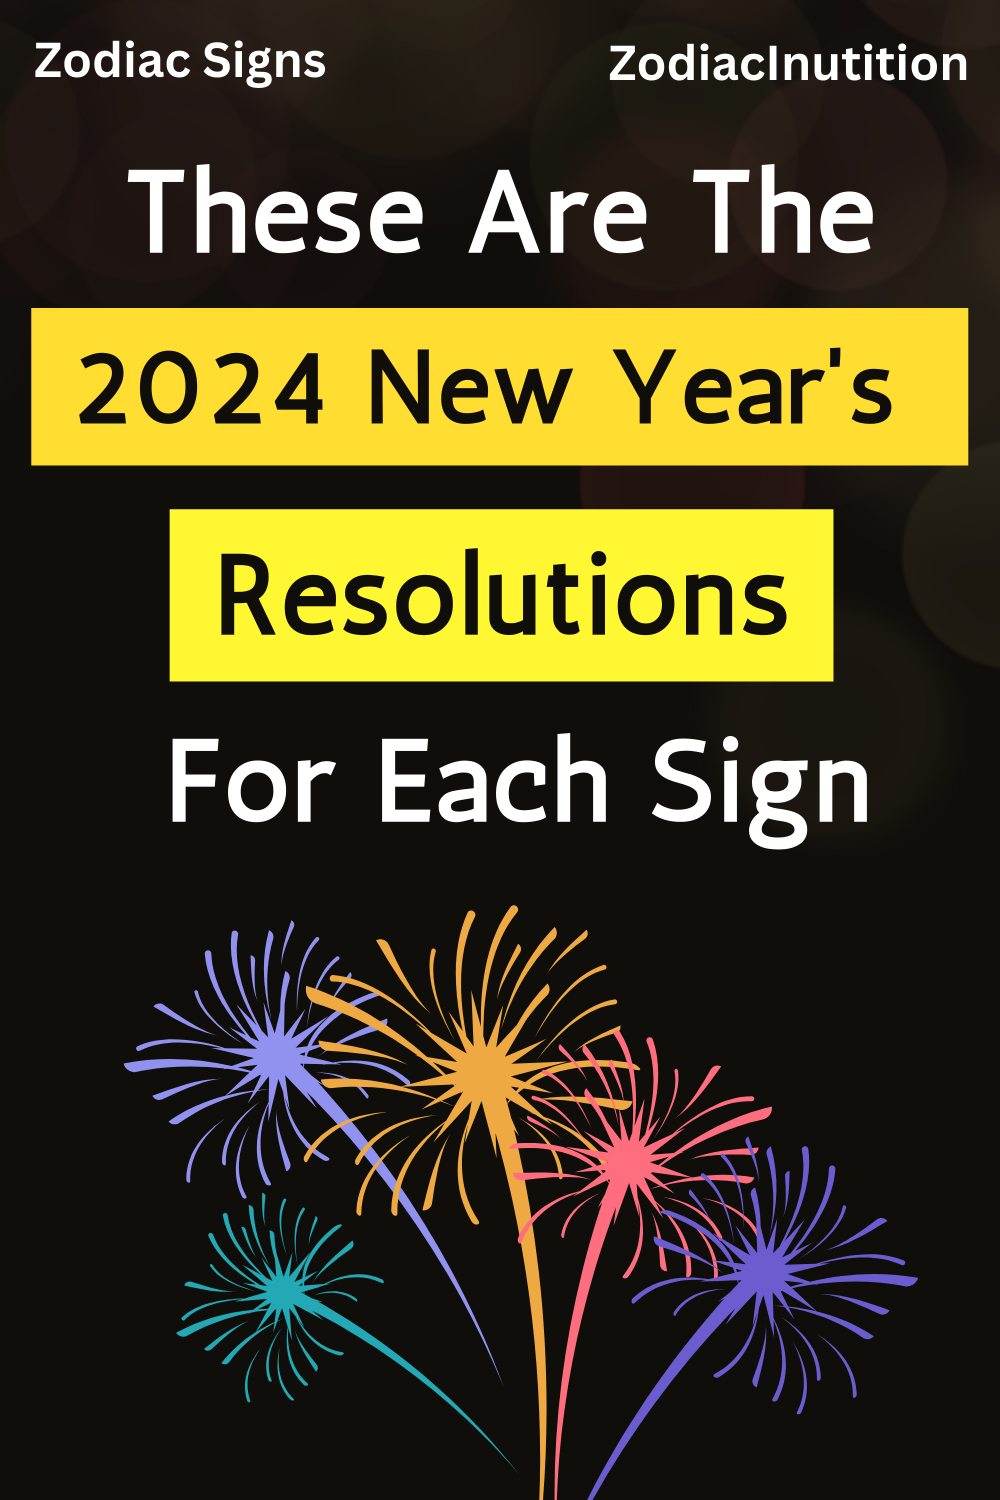 These Are The 2024 New Year's Resolutions For Each Sign